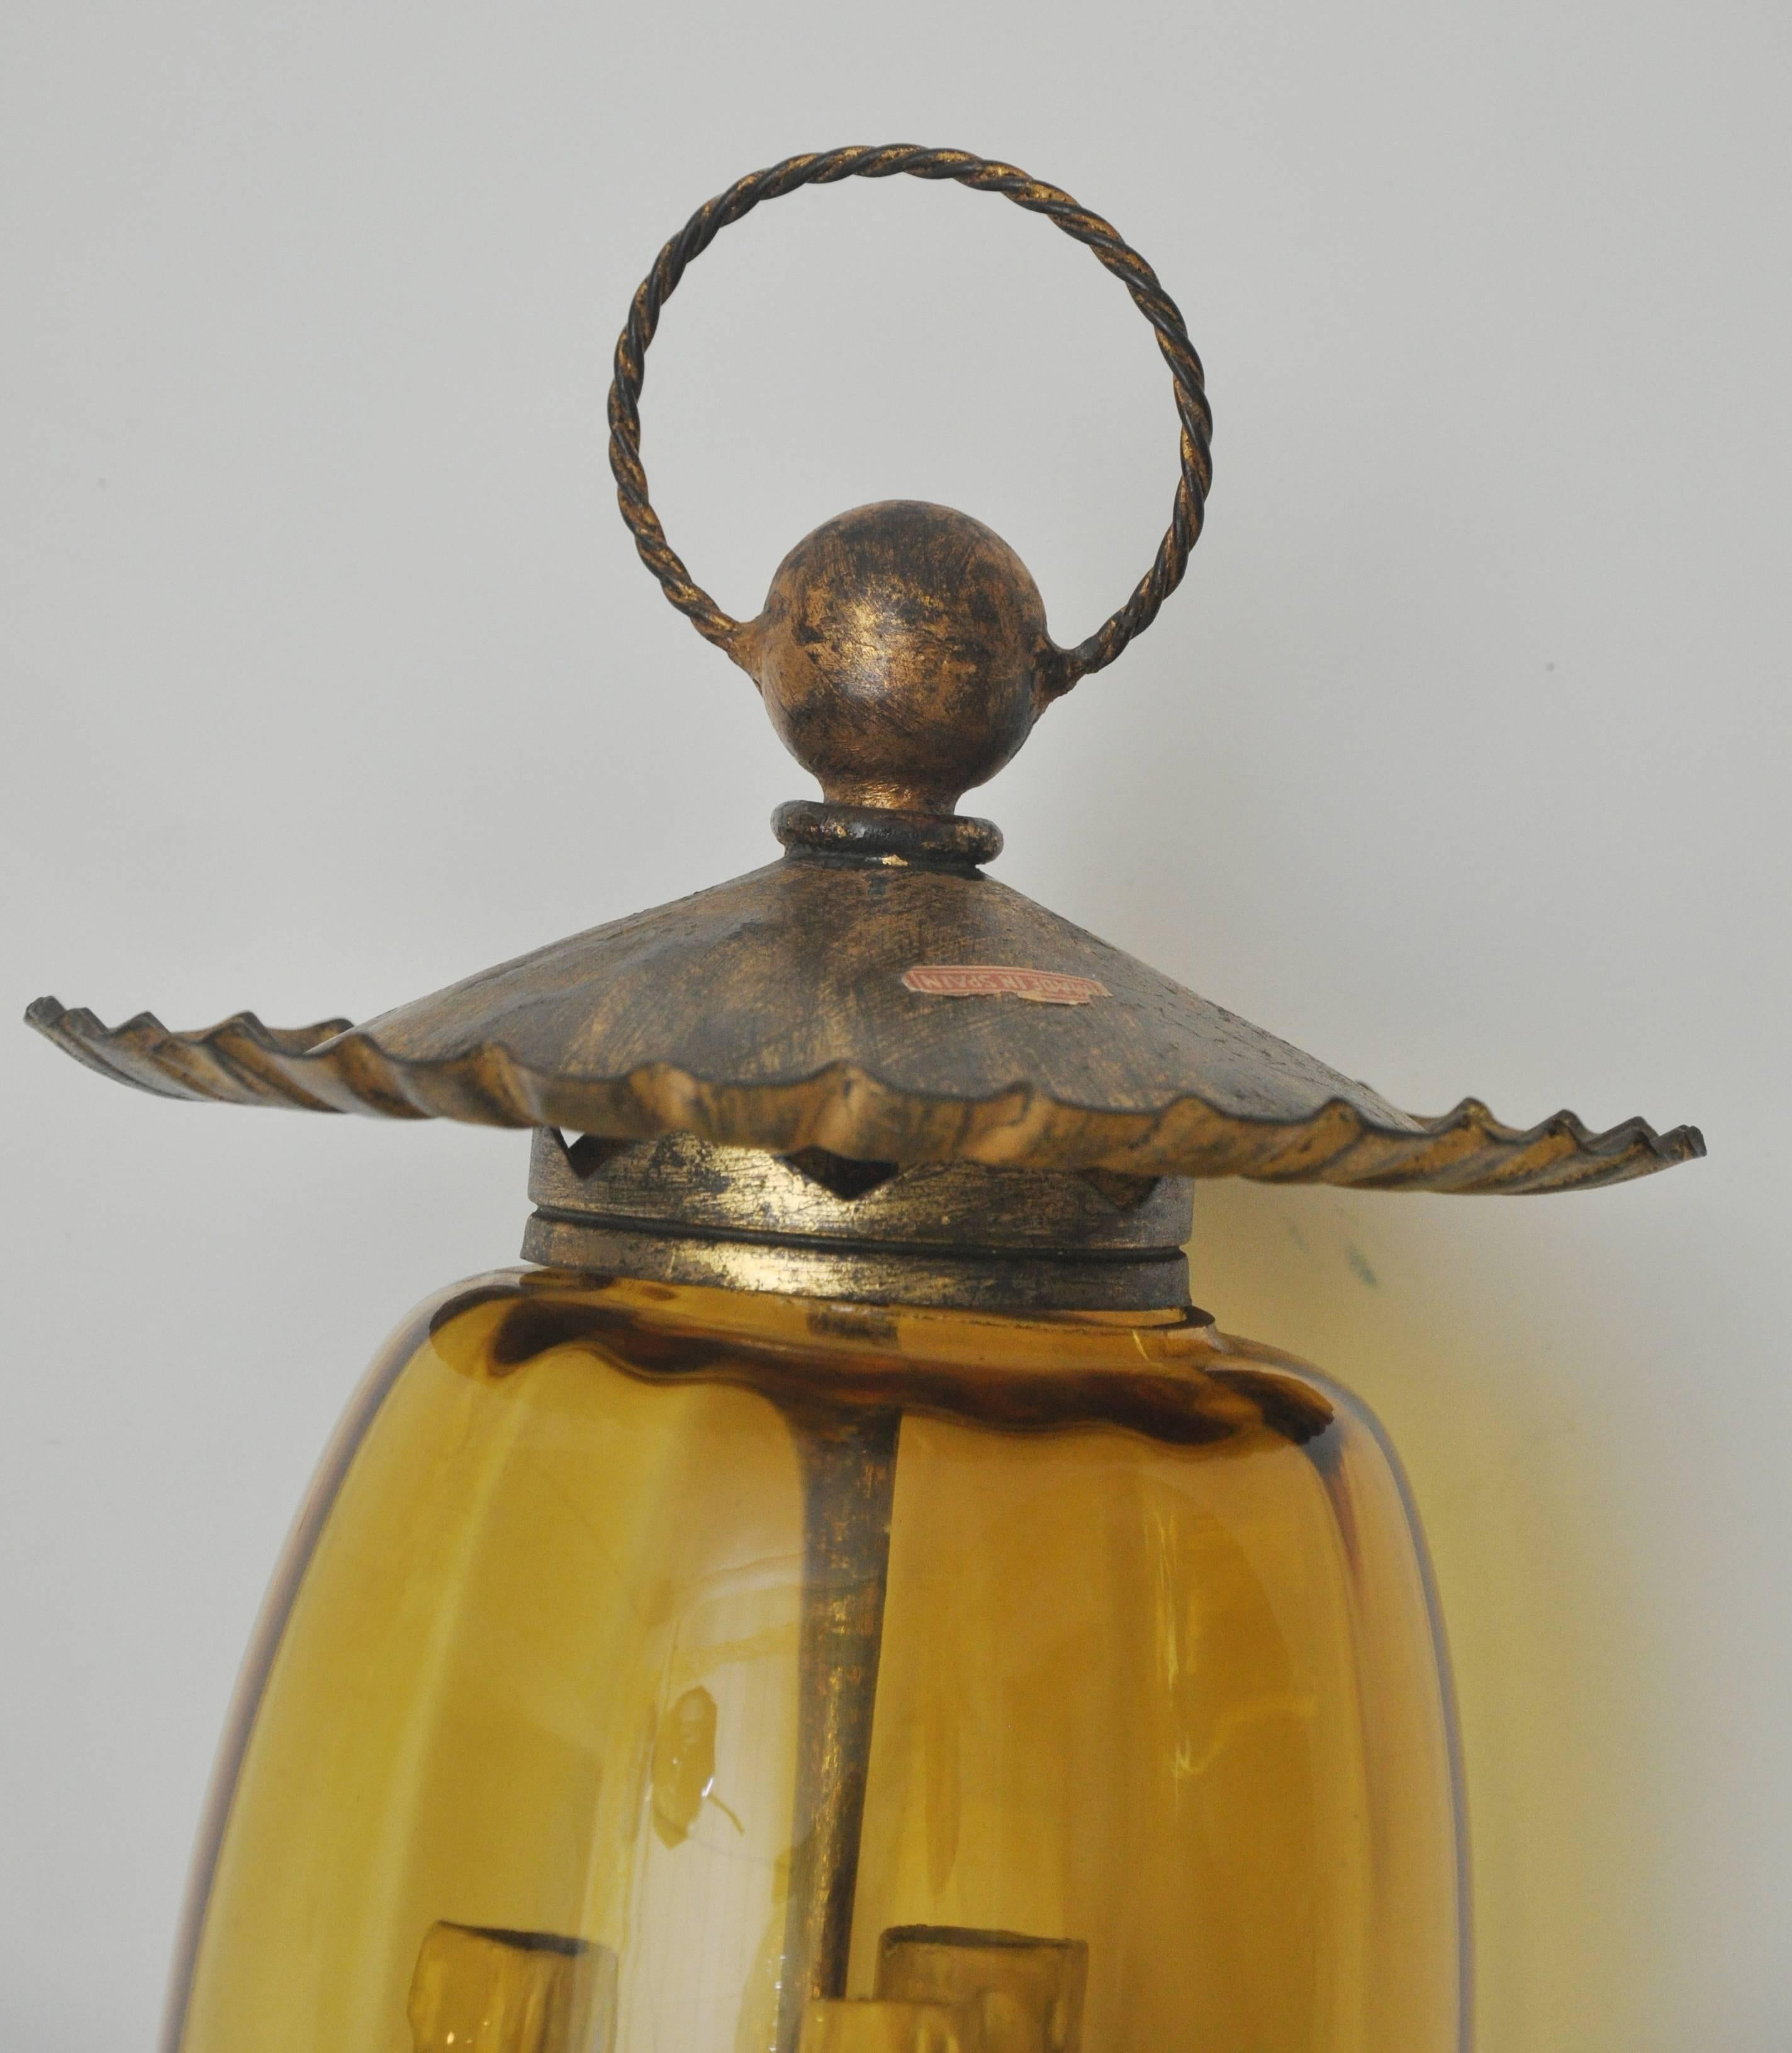 Beautifully made iron with gilt sconce. Curved amber glass. Has three standard bulb based sockets for up to 75 watts each. Great handmade details. Made in Italy in the 1960s. Re-wired and ready to install.